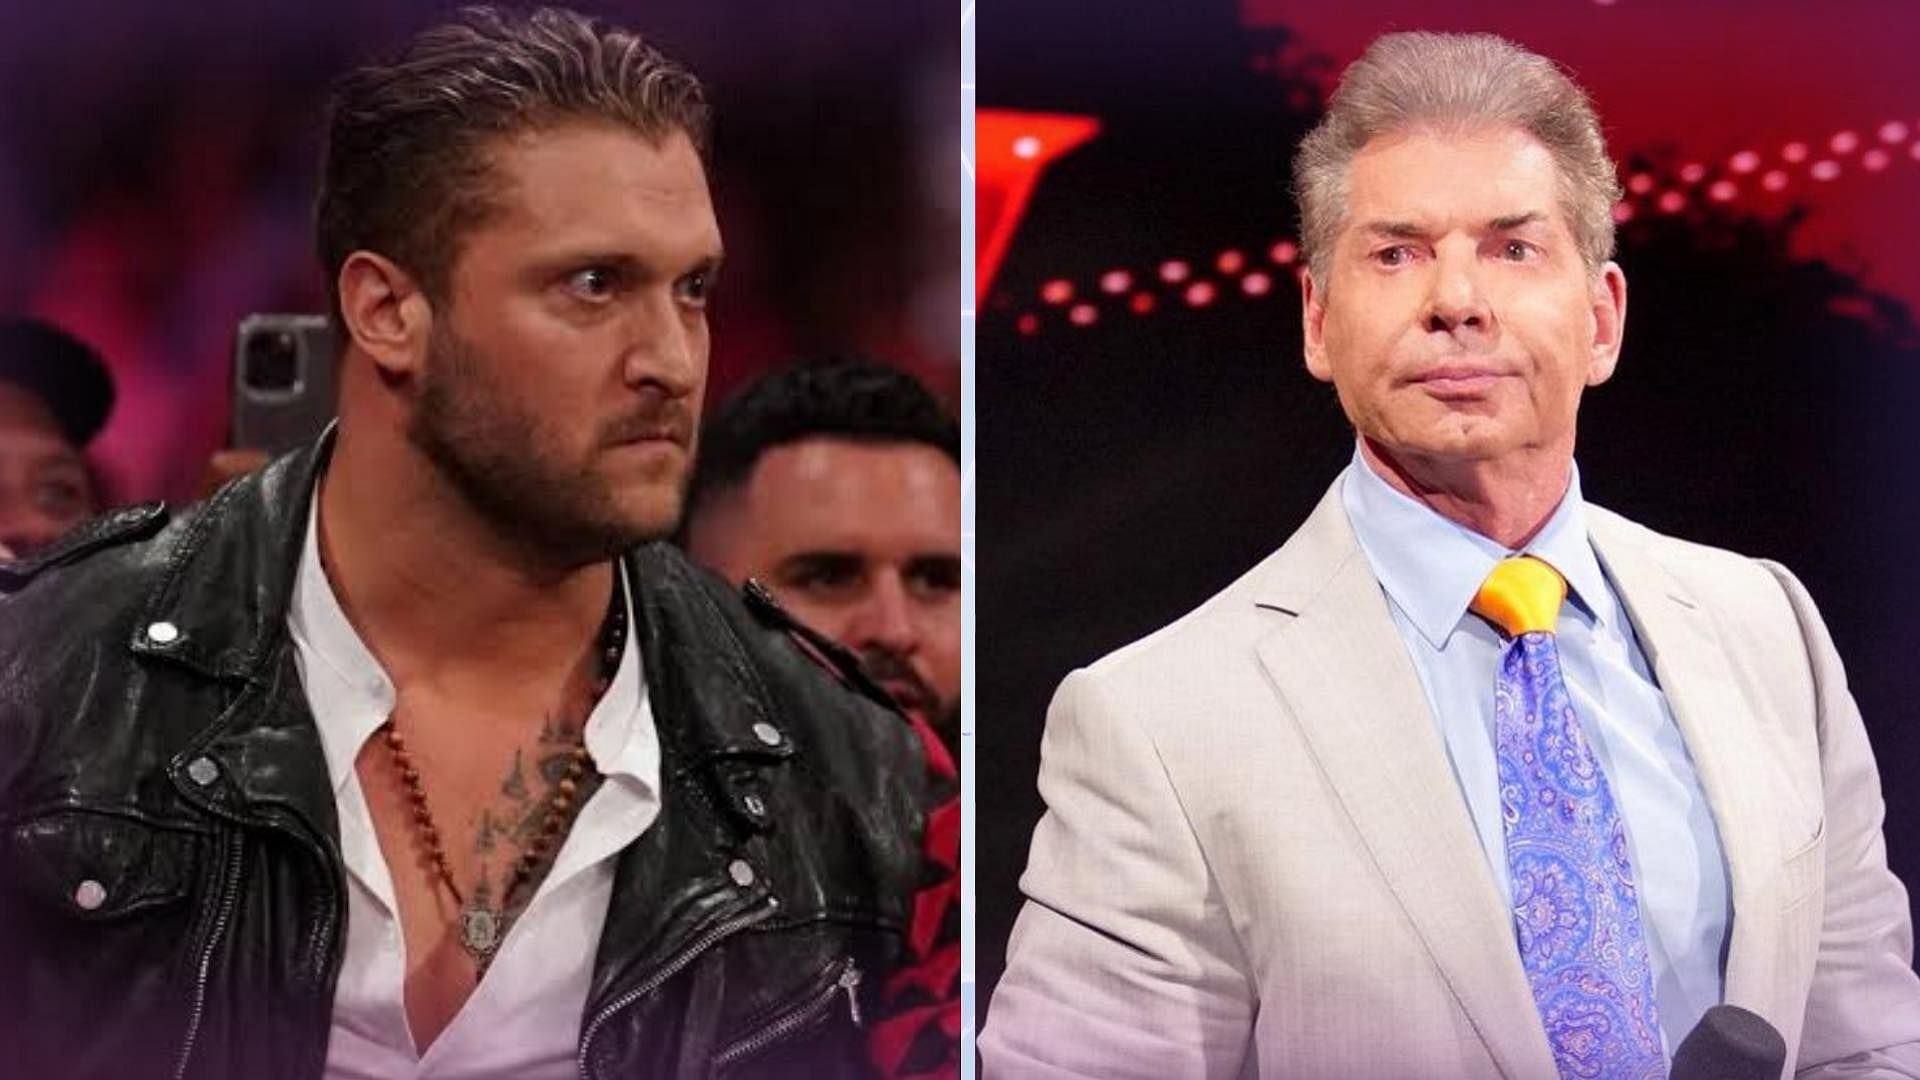 Karrion Kross and Vince McMahon